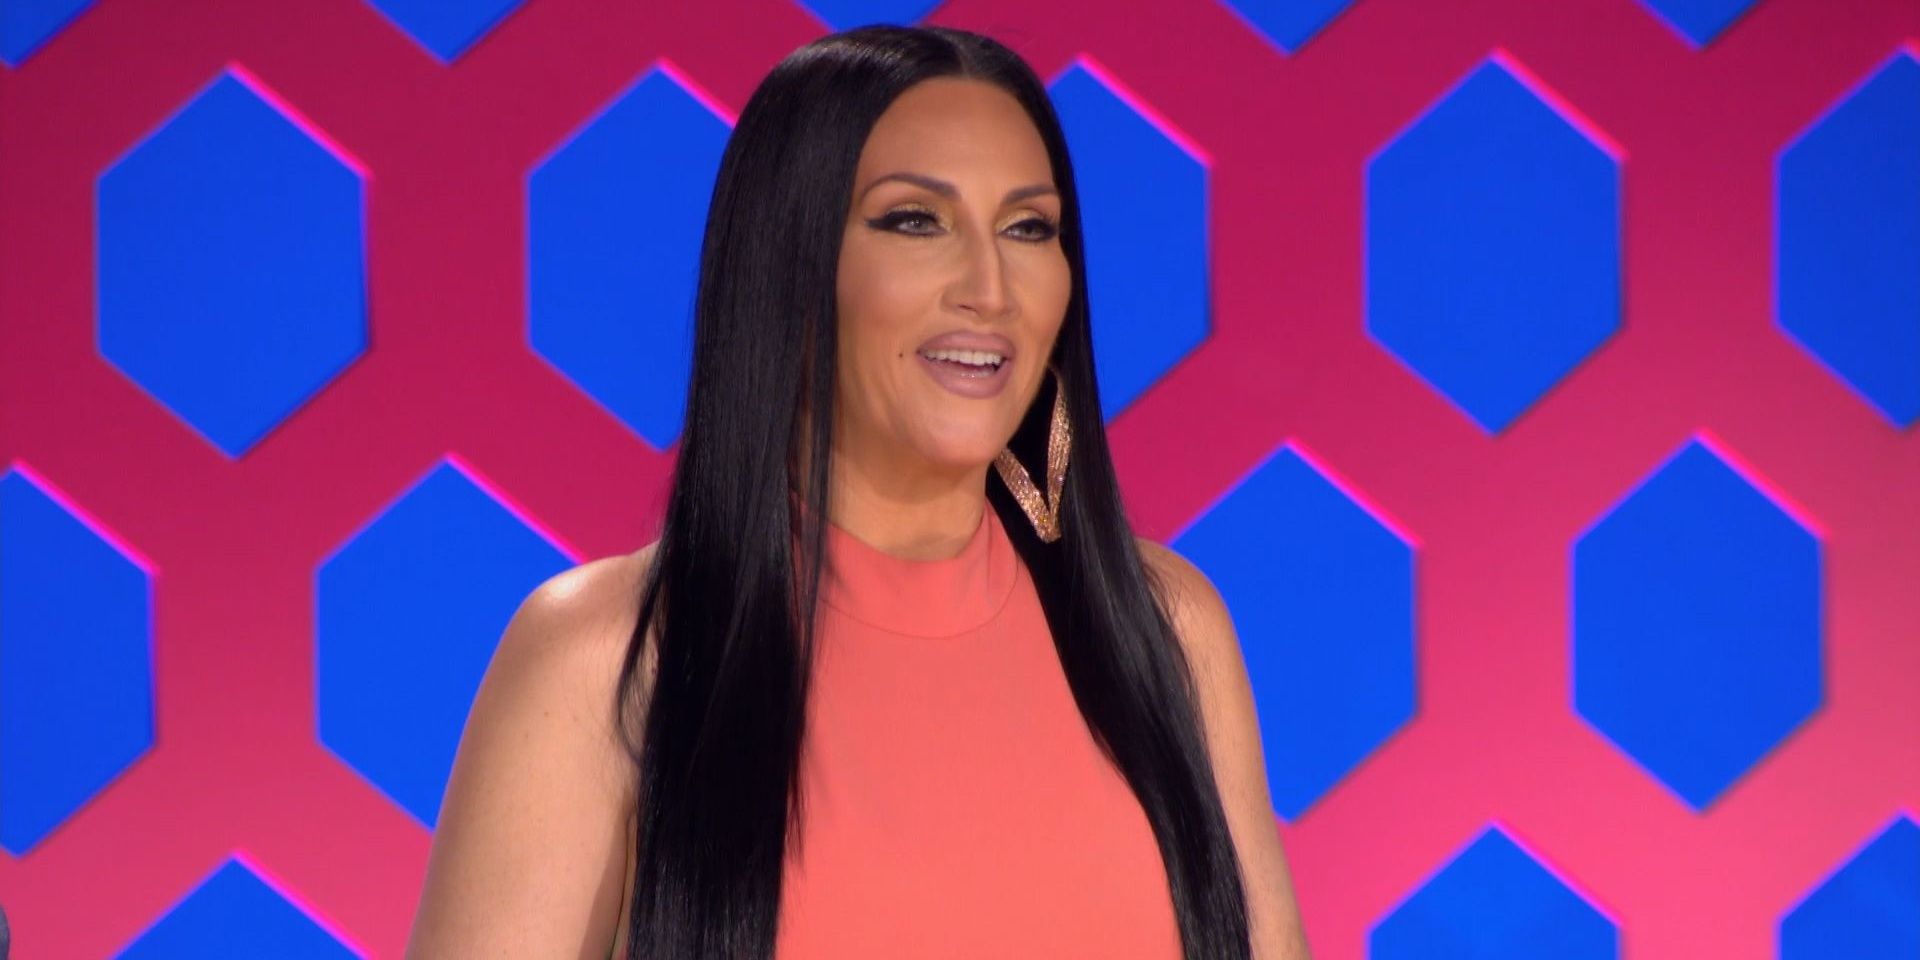 Michelle Visage behind the judges' table on RuPaul's Drag Race